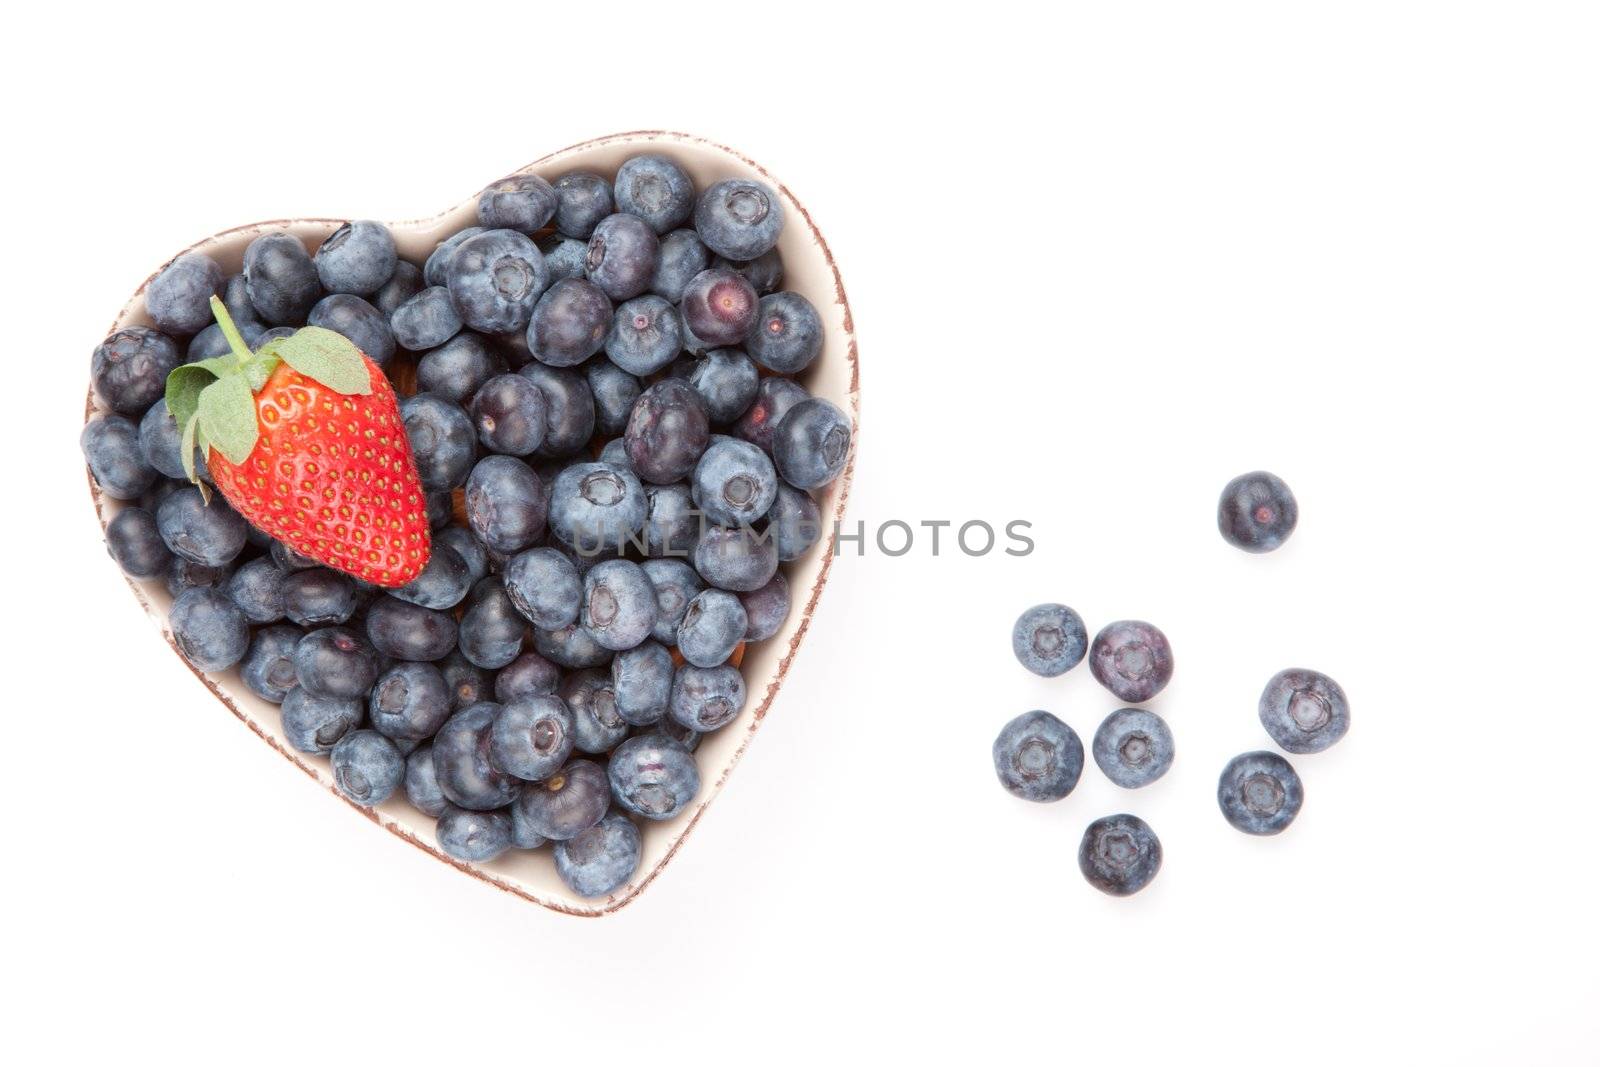 One strawberry and bluberries in  a heart shaped bowl by Wavebreakmedia